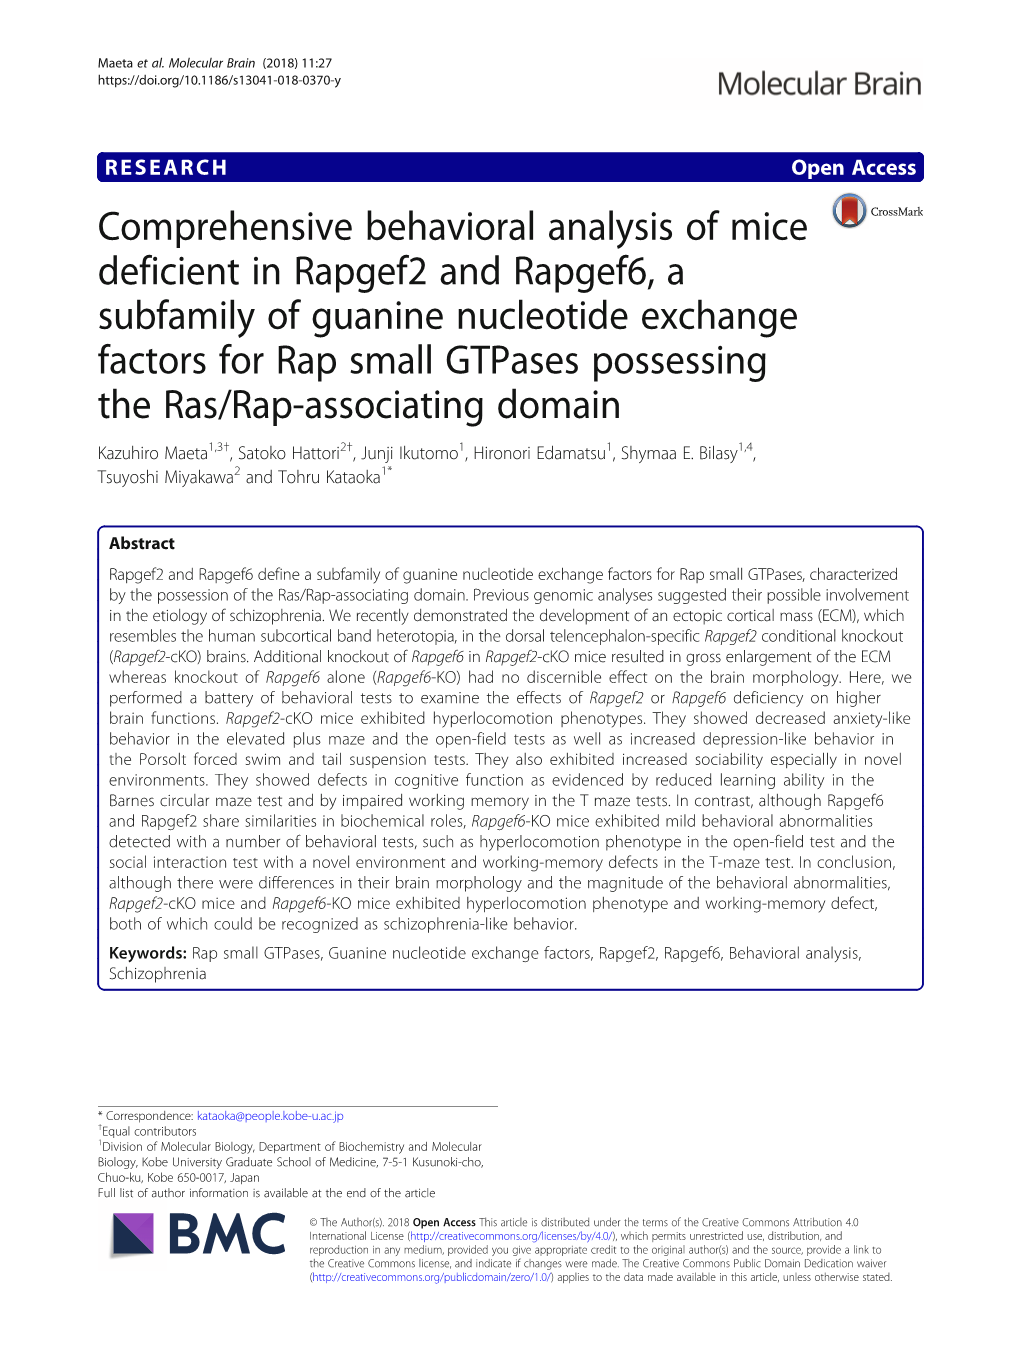 Comprehensive Behavioral Analysis of Mice Deficient in Rapgef2 And